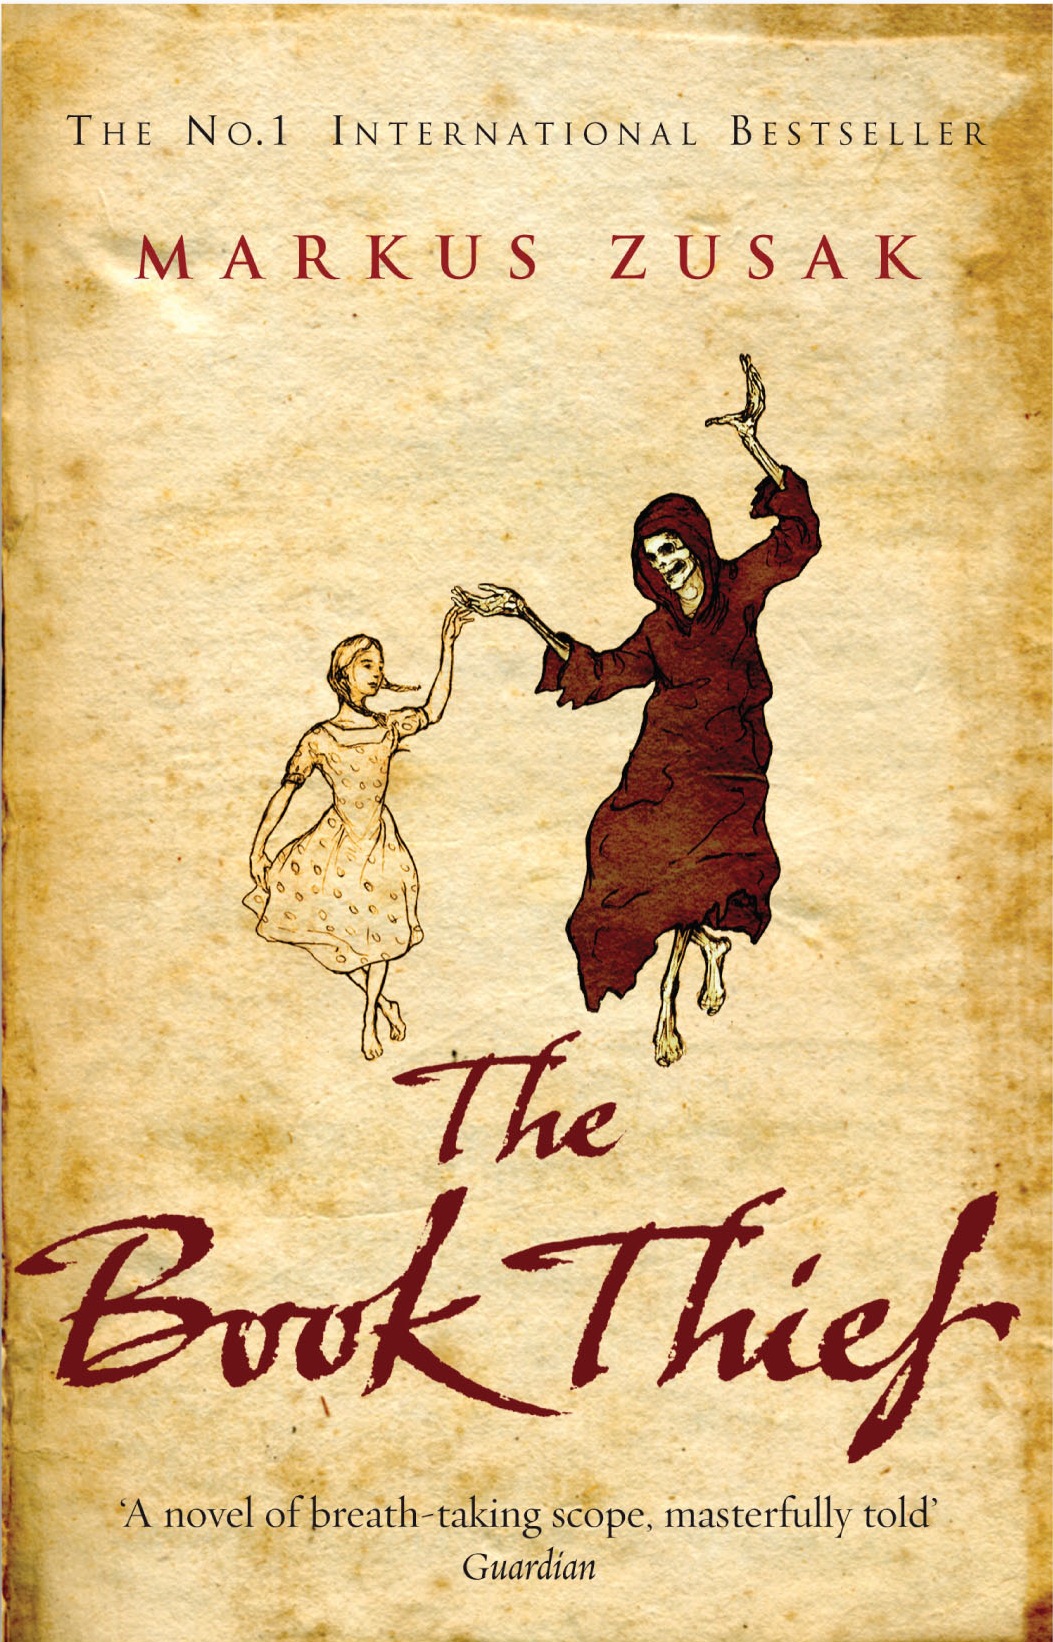 Pages Stolen in Silence: Markus Zusak’s The Book Thief Explored